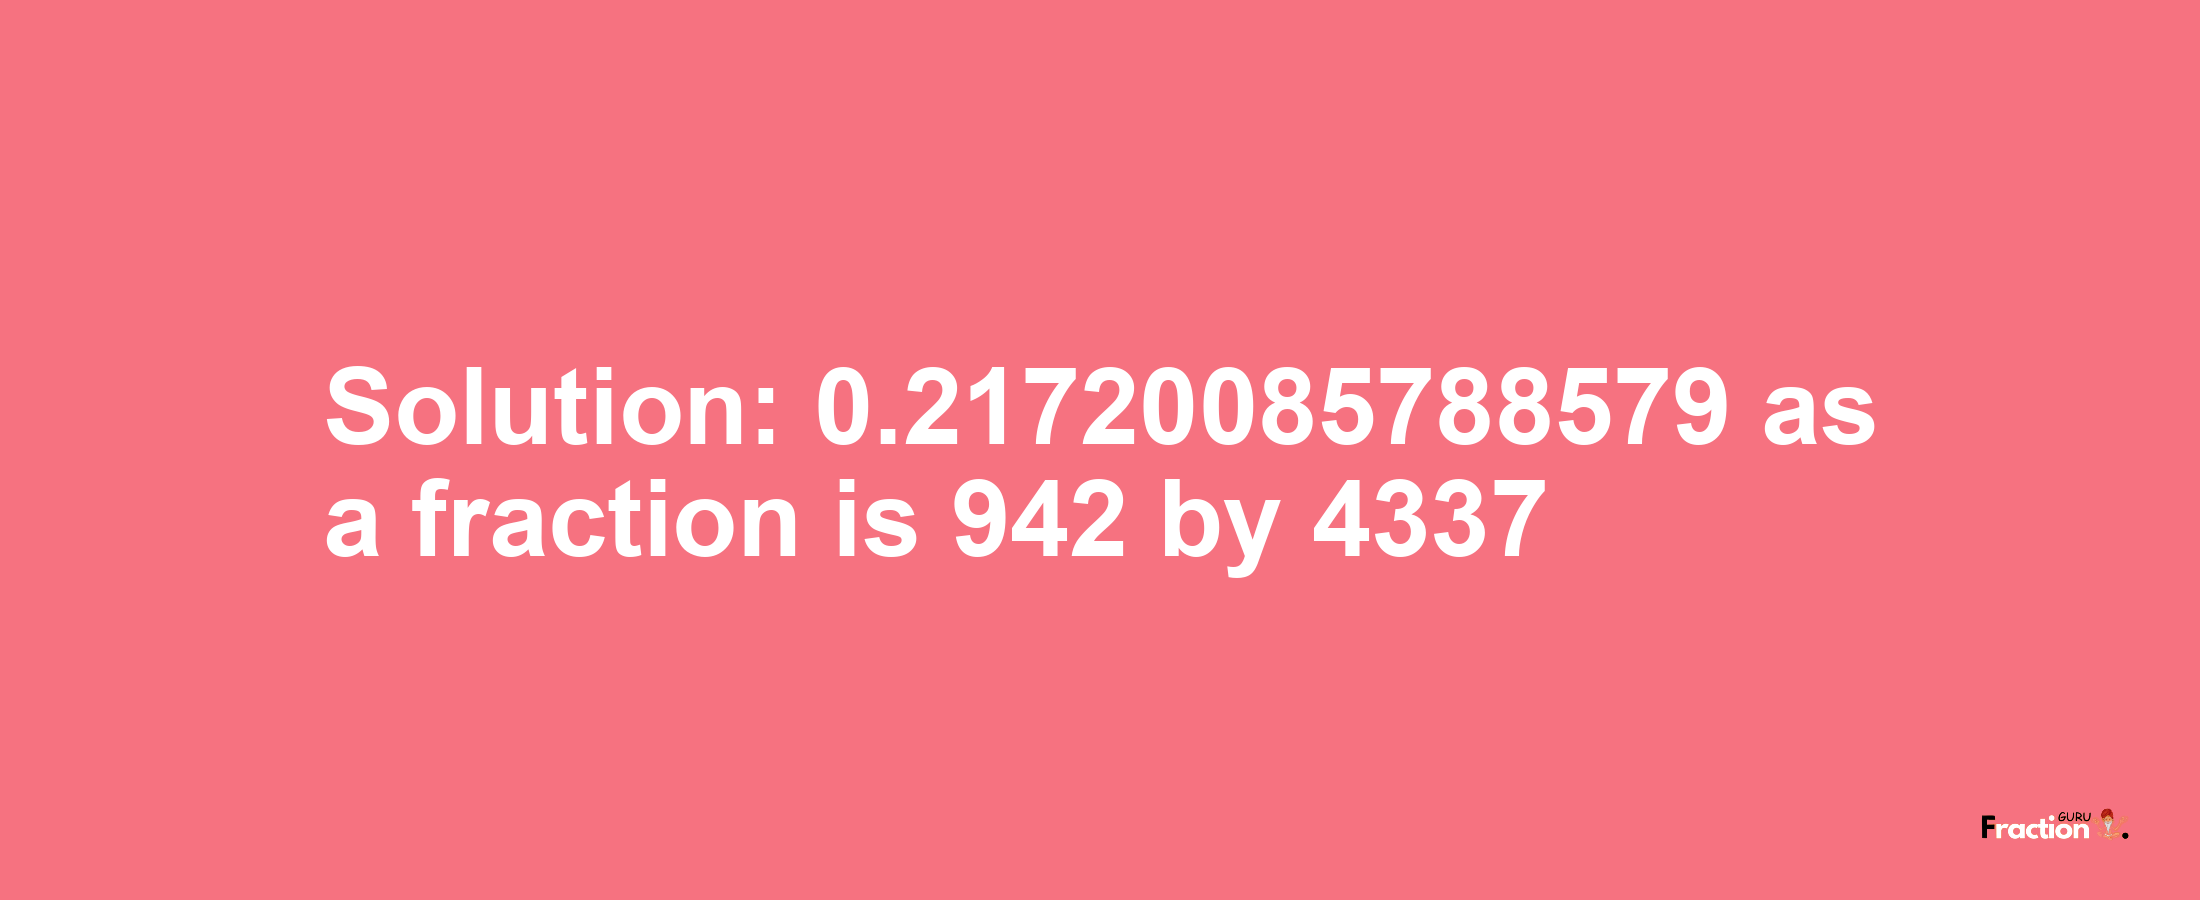 Solution:0.21720085788579 as a fraction is 942/4337